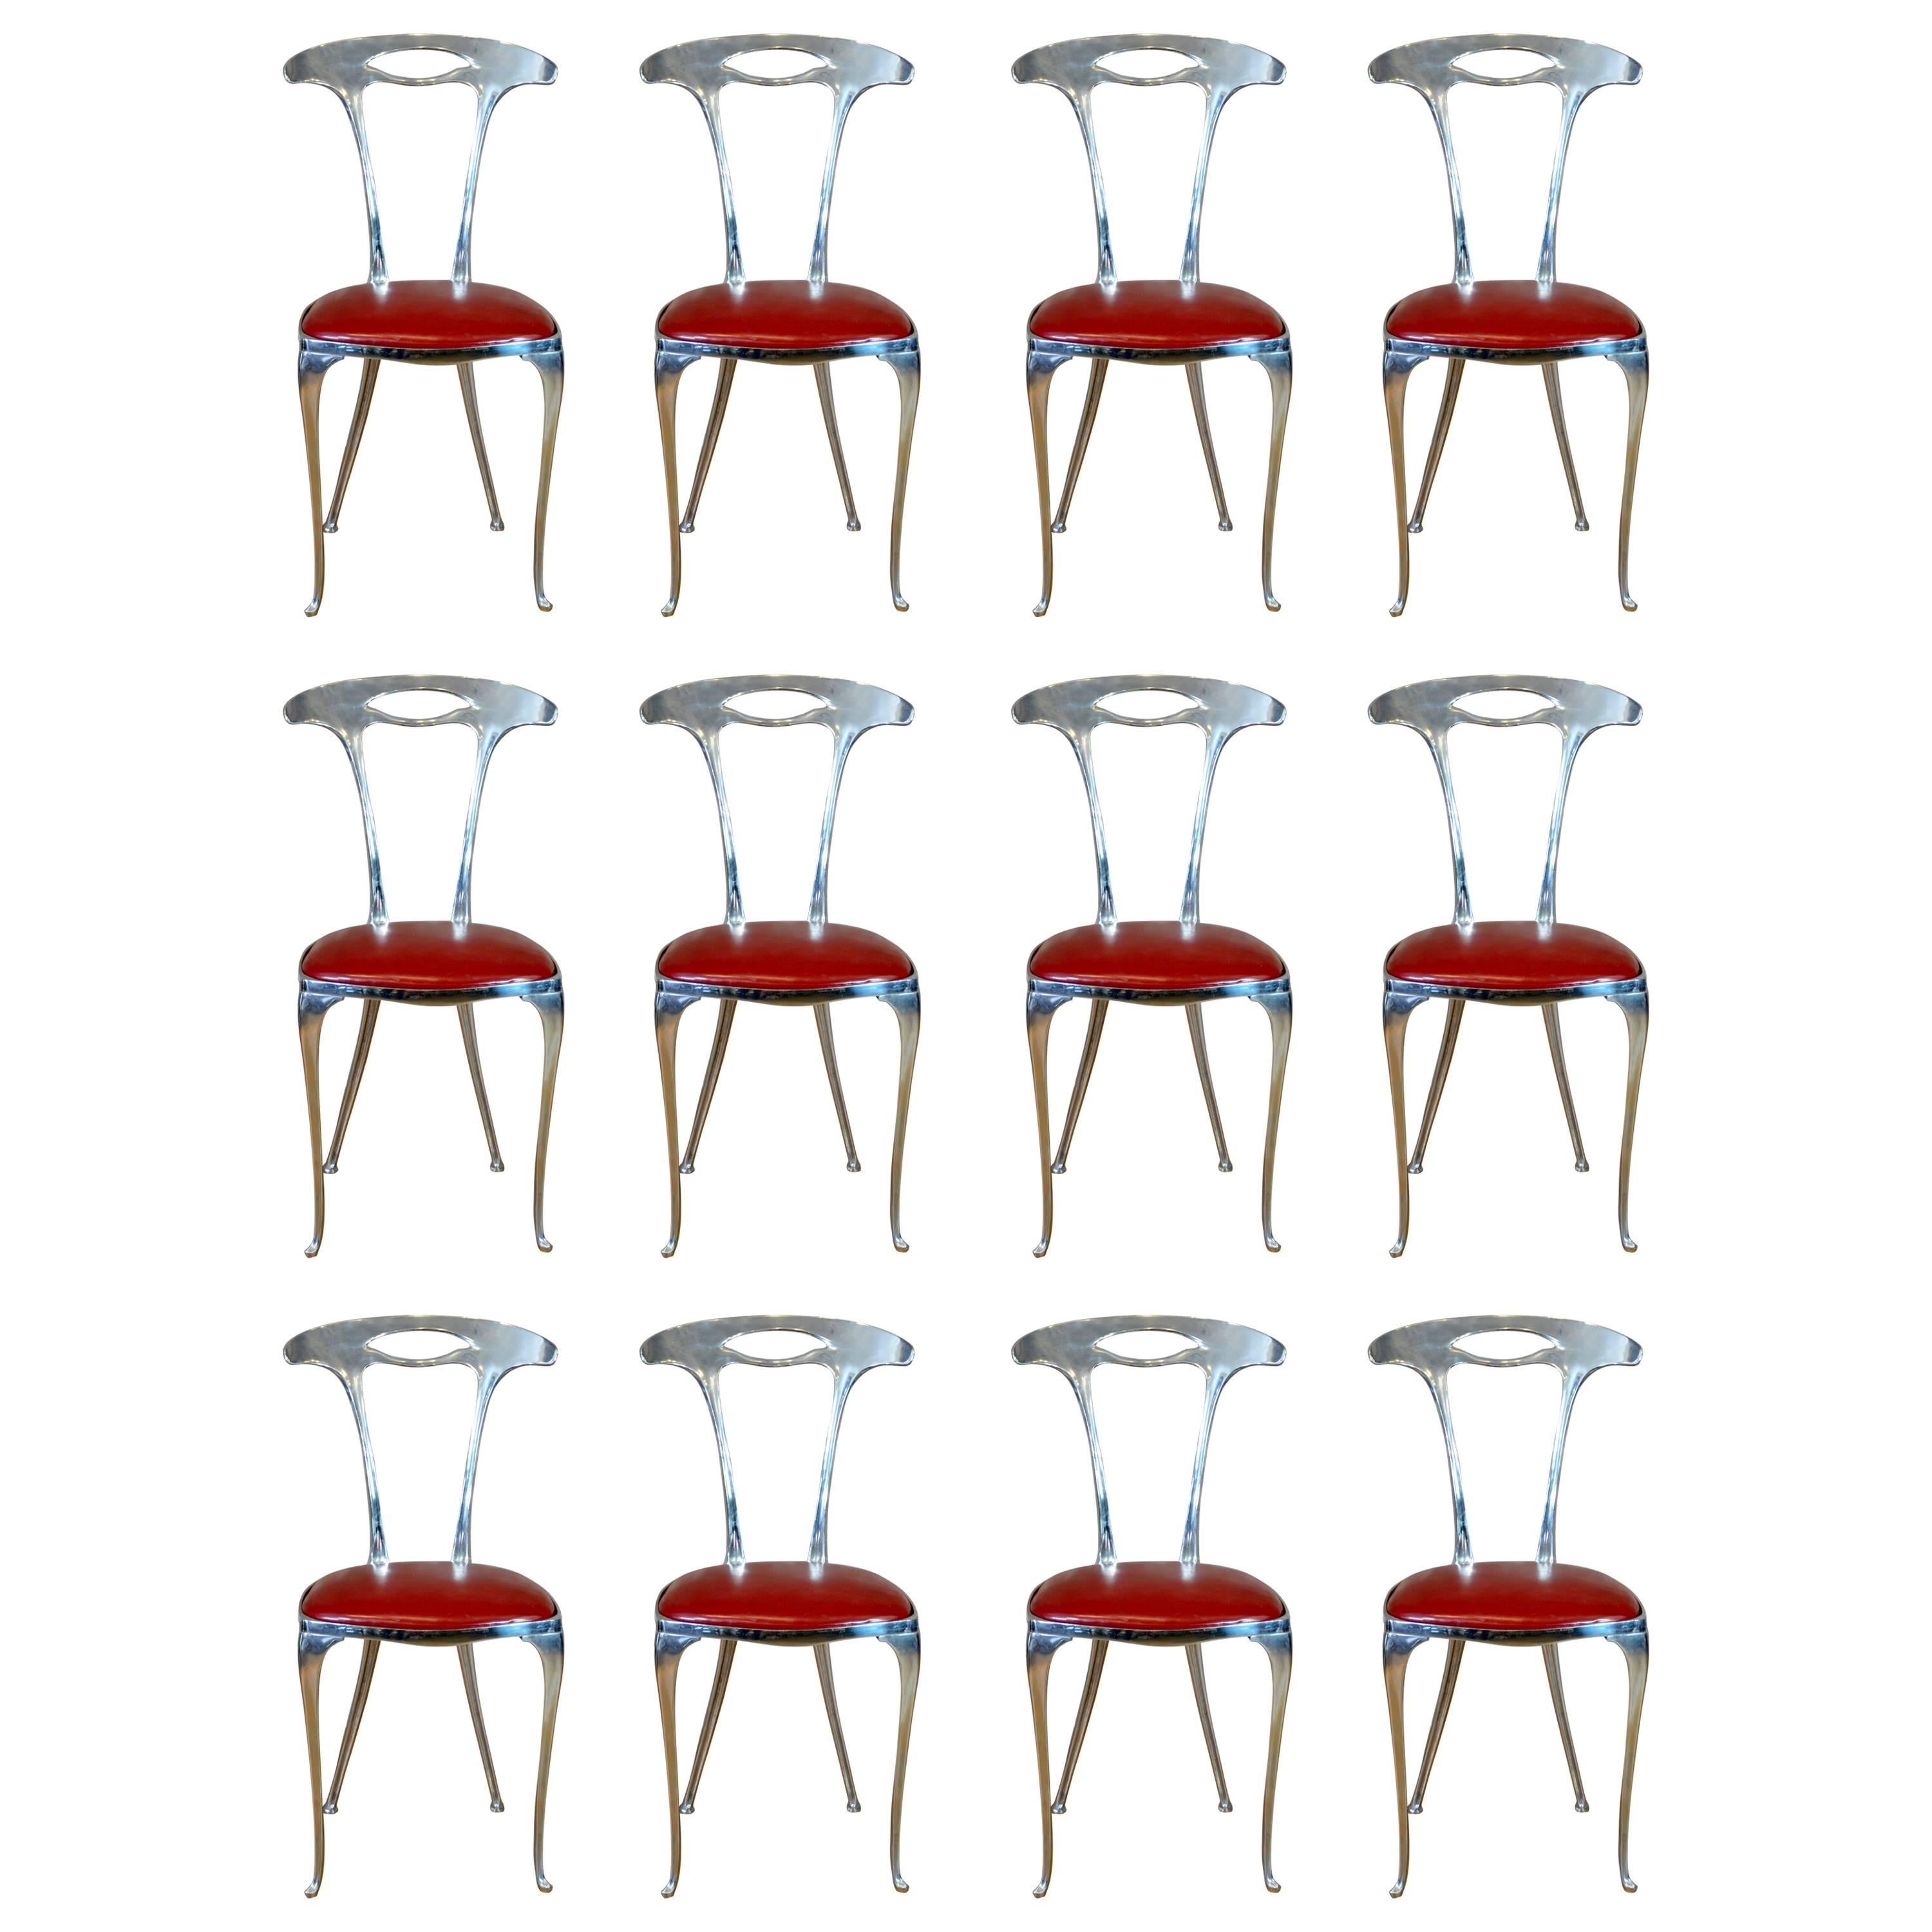 10 Polished Aluminum Thinline Dining Chairs For Sale